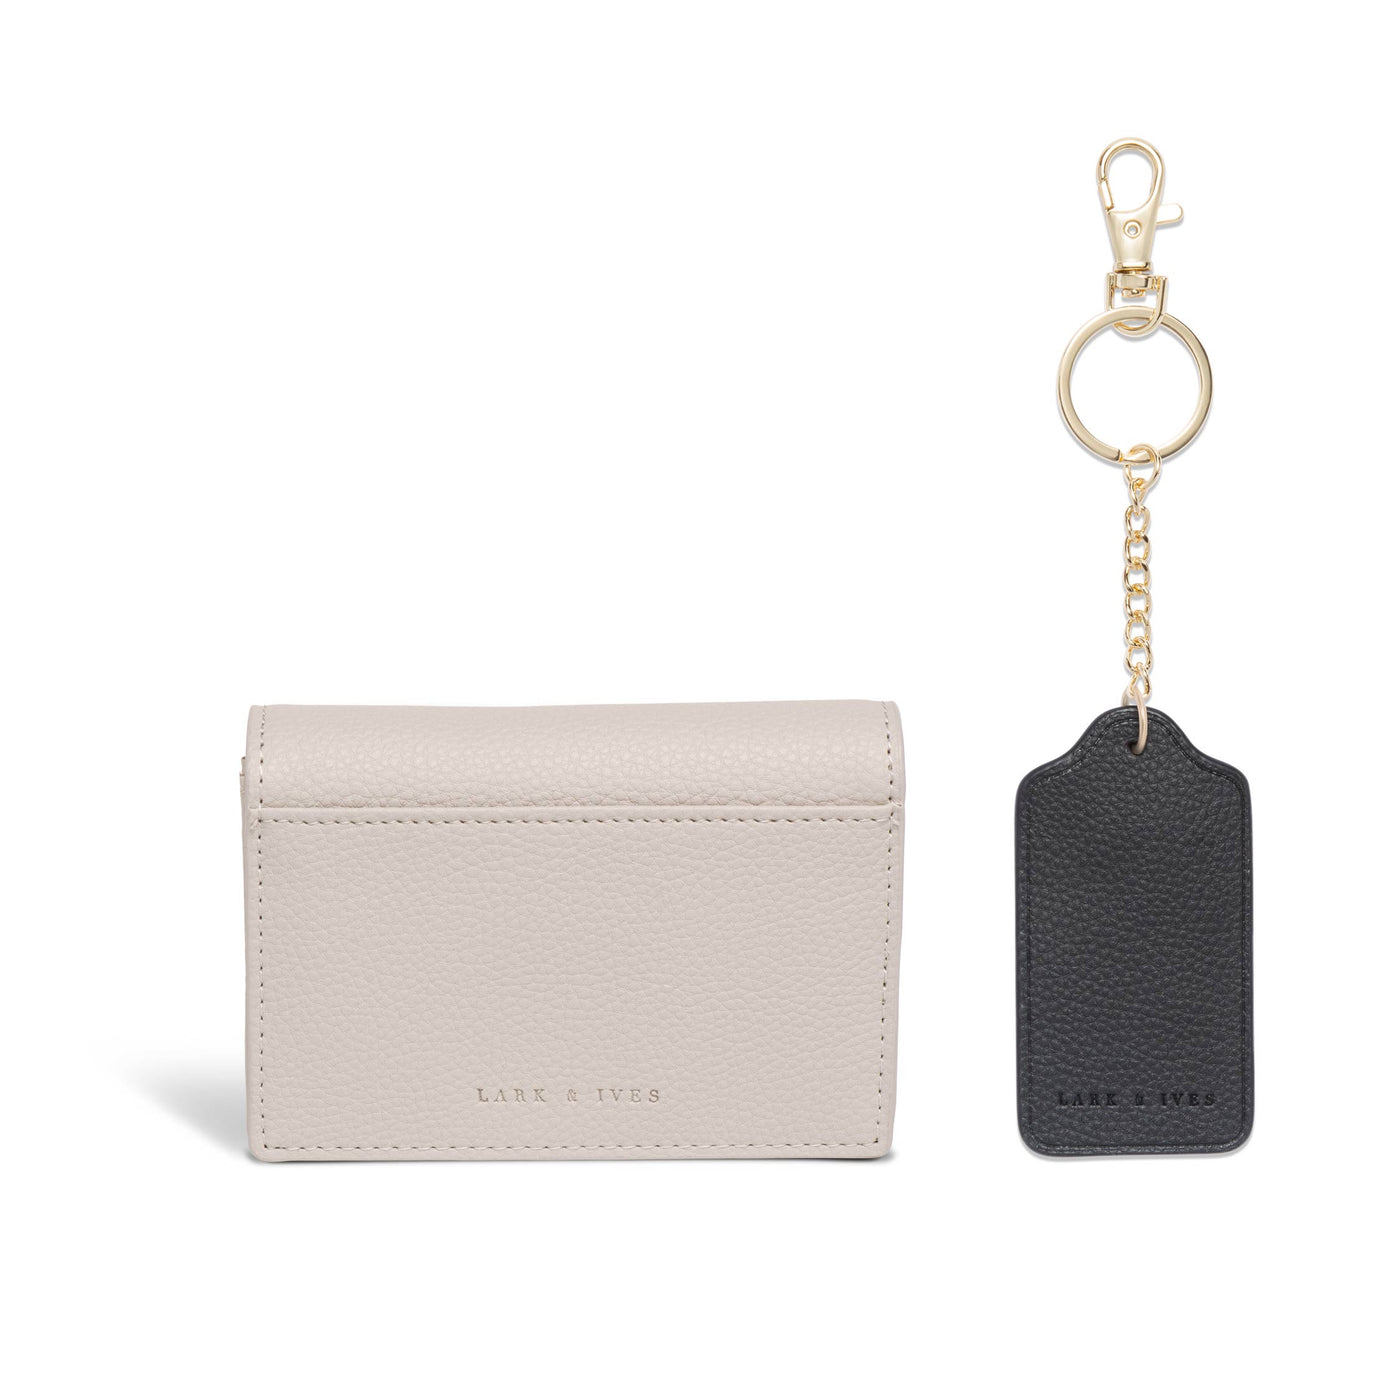 Lark and Ives / Vegan Leather Accessories / Small Accessories / Wallet / Mini Wallet / Card Case / Card Holder / Button snap closure / Fold Wallet / Tag Keychain / Keychain / Key Holder / Light Beige Card Case and Black Keychain